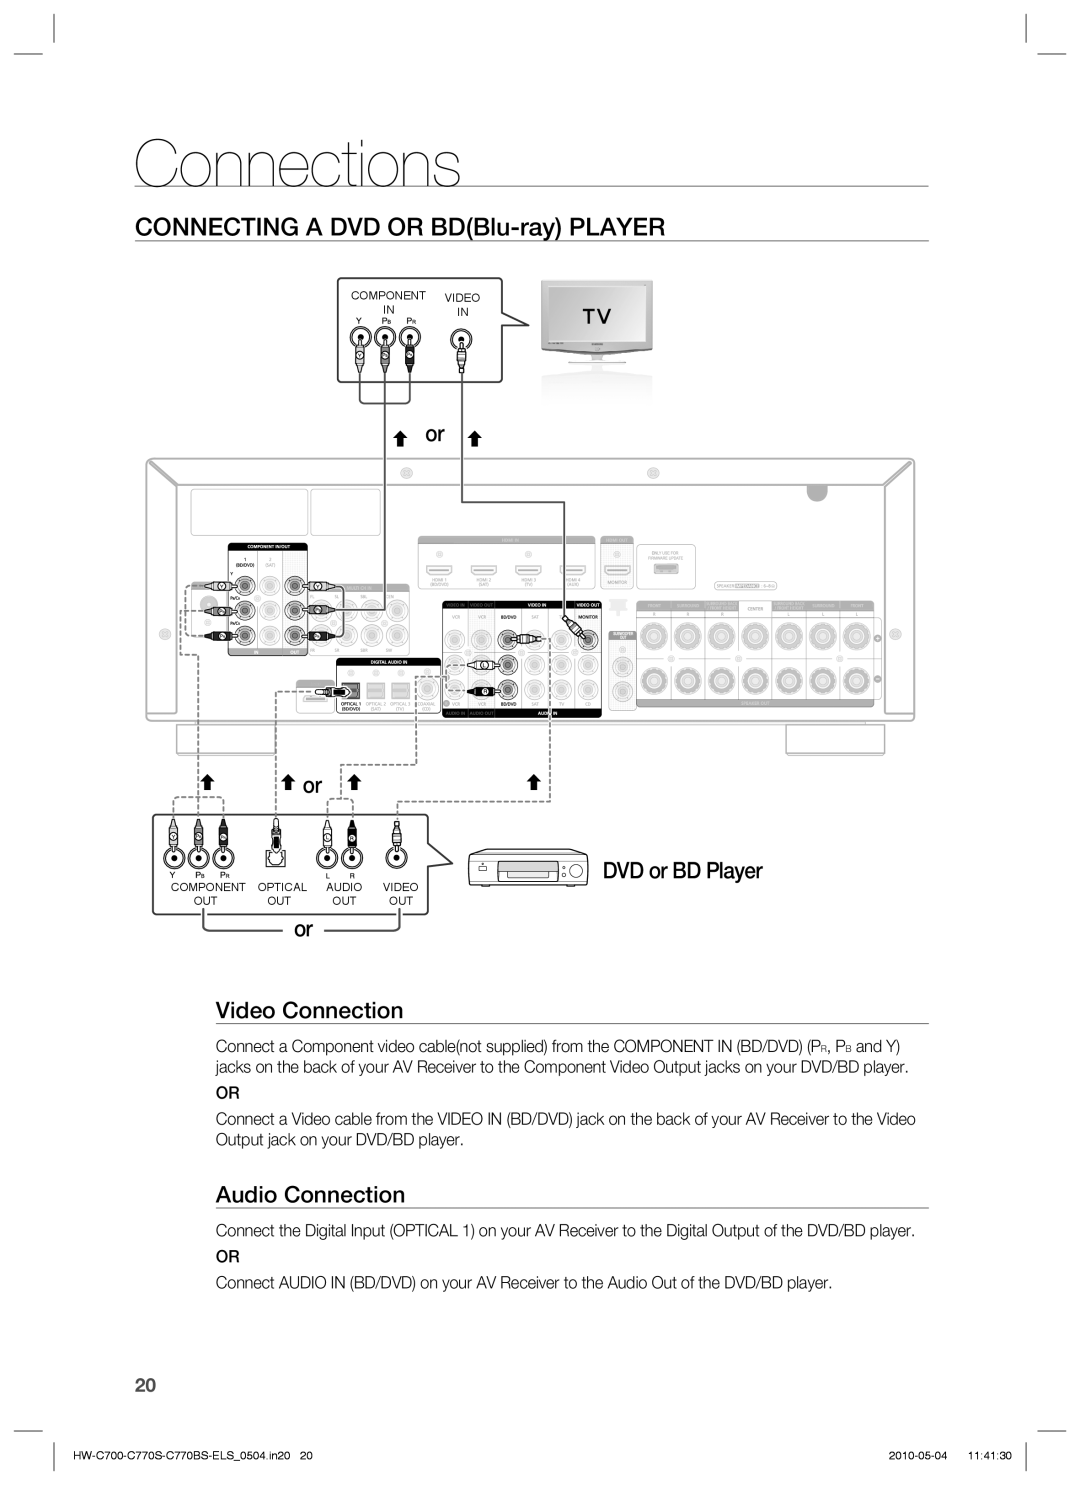 Samsung HW-C700/XEN manual Connections, CONNECTING A DVD OR BDBlu-ray PLAYER, or or DVD or BD Player, or Video Connection 